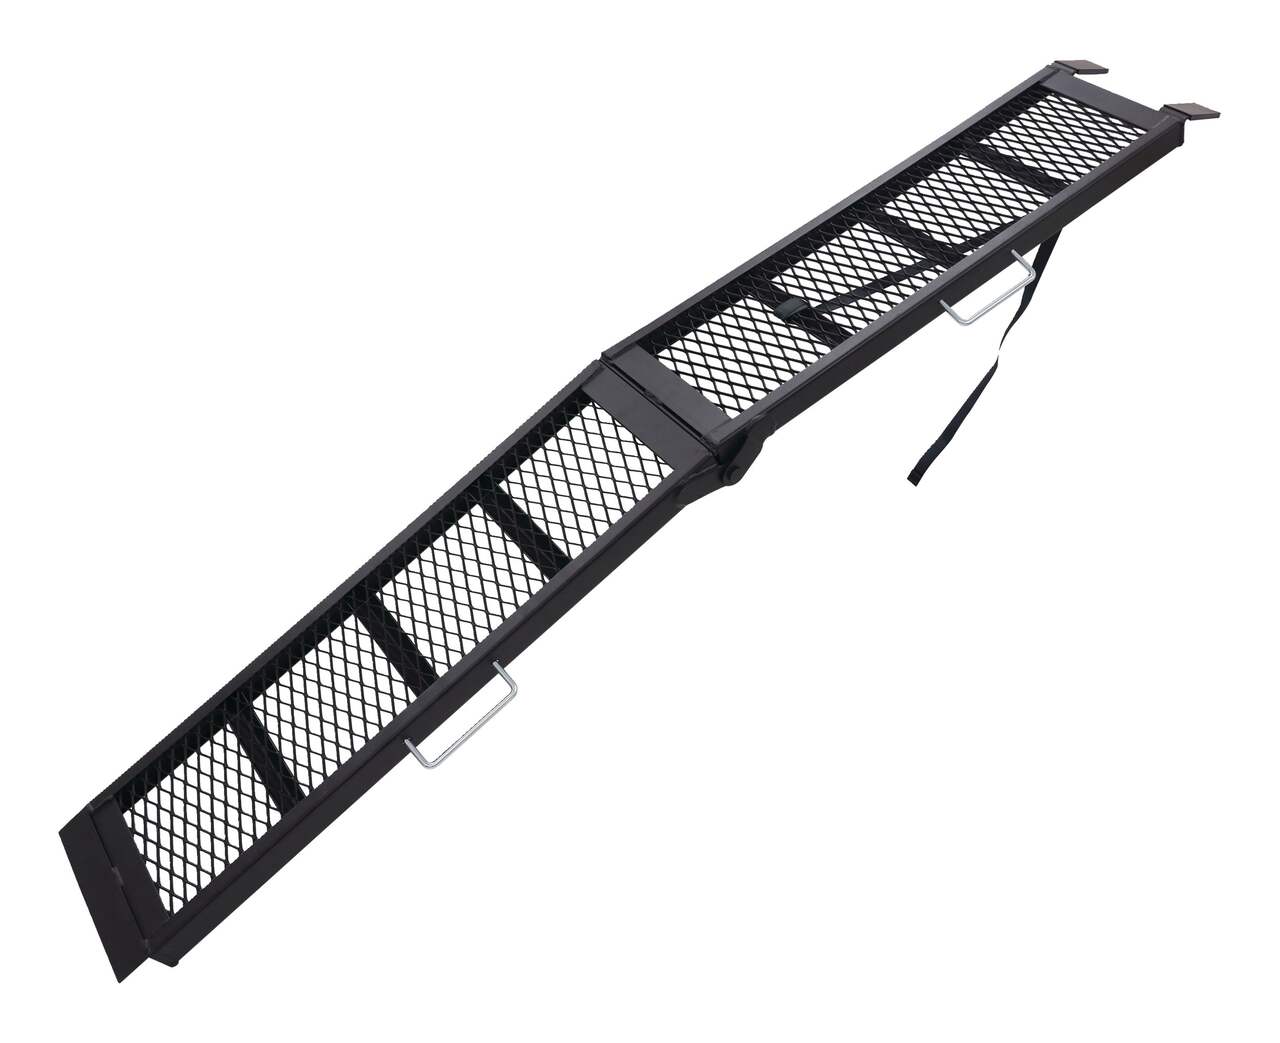 https://media-www.canadiantire.ca/product/automotive/automotive-outdoor-adventure/auto-travel-storage/0403098/80-steel-mesh-loading-ramp-1-piece-4bd9cdce-a486-43ff-aa26-a90b25b62d9f-jpgrendition.jpg?imdensity=1&imwidth=640&impolicy=mZoom